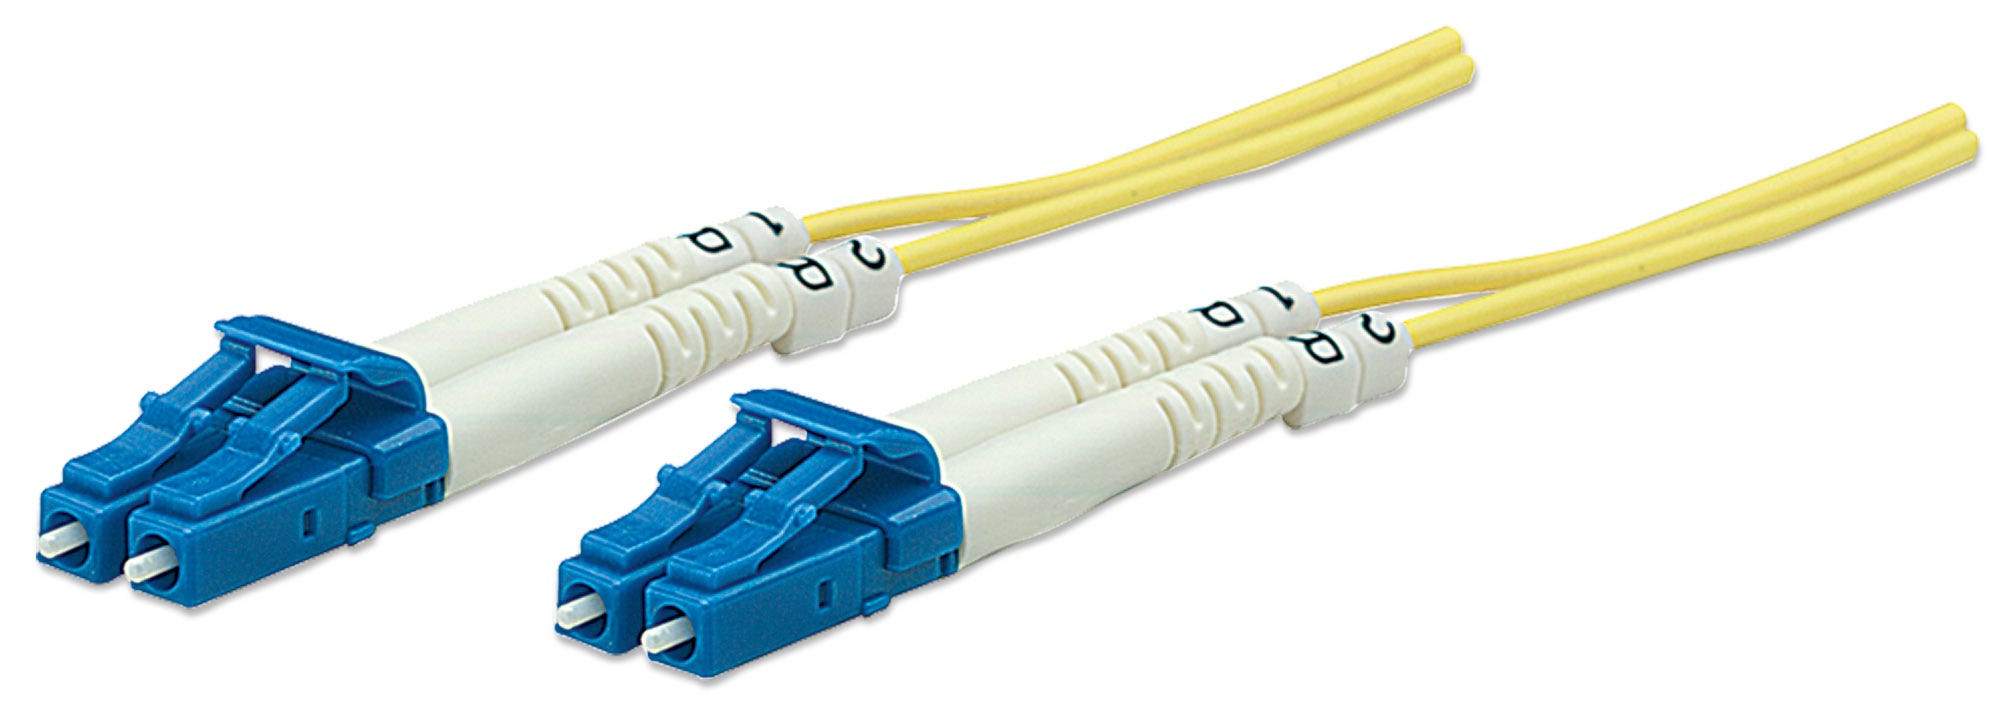 Photos - Cable (video, audio, USB) INTELLINET Fiber Optic Patch Cable, OS2, LC/LC, 3m, Yellow, Duplex, Si 471 